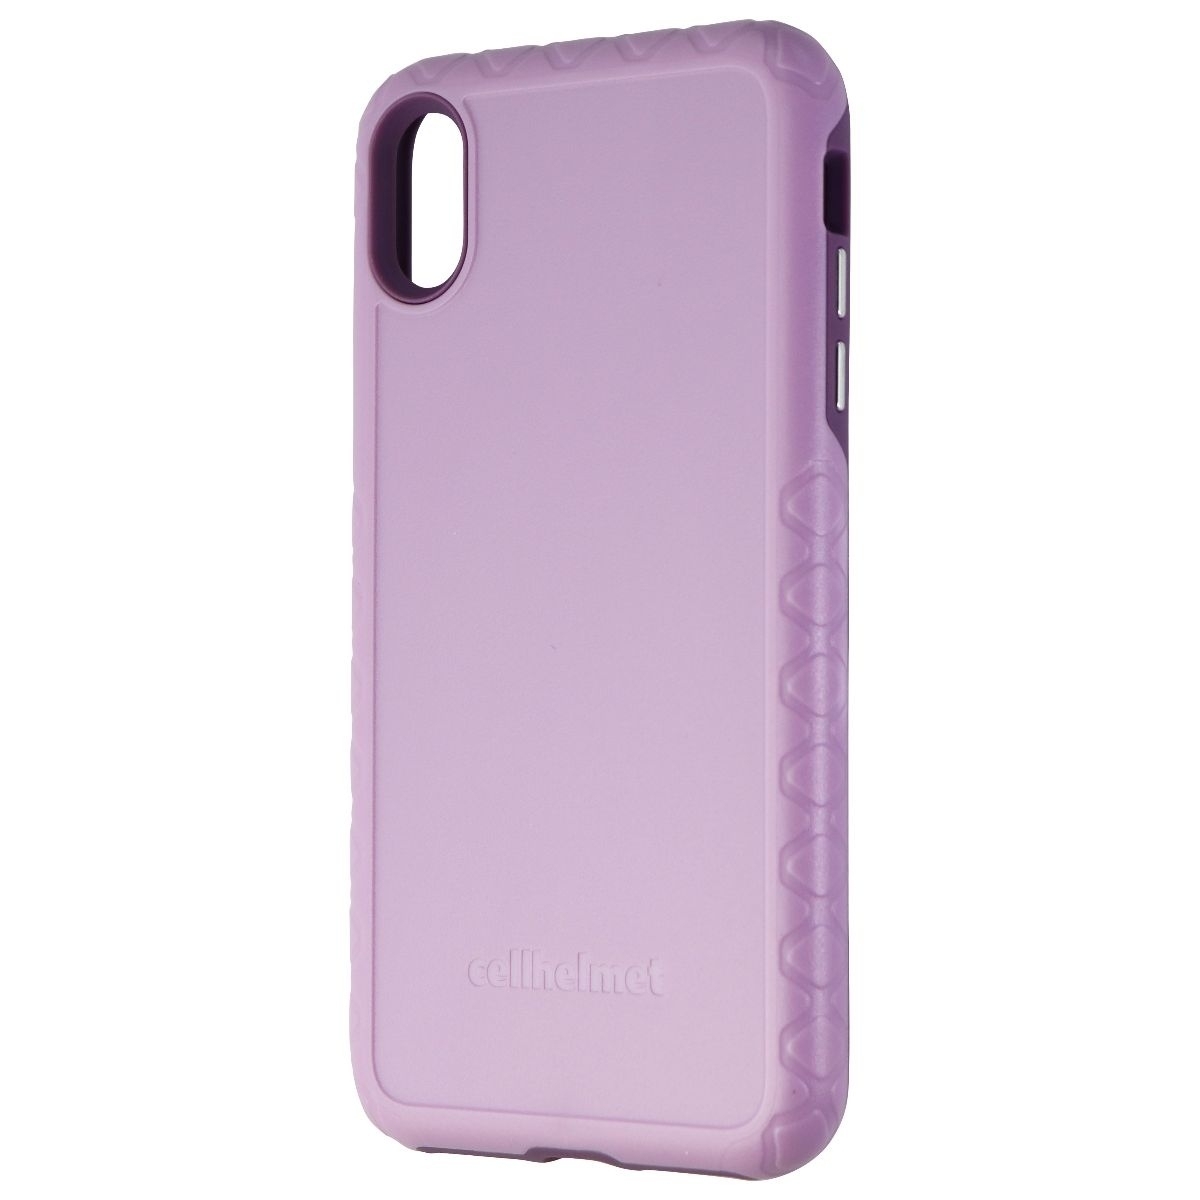 CellHelmet Fortitude Series Case For Apple IPhone XS Max - Lilac Blossom Purple